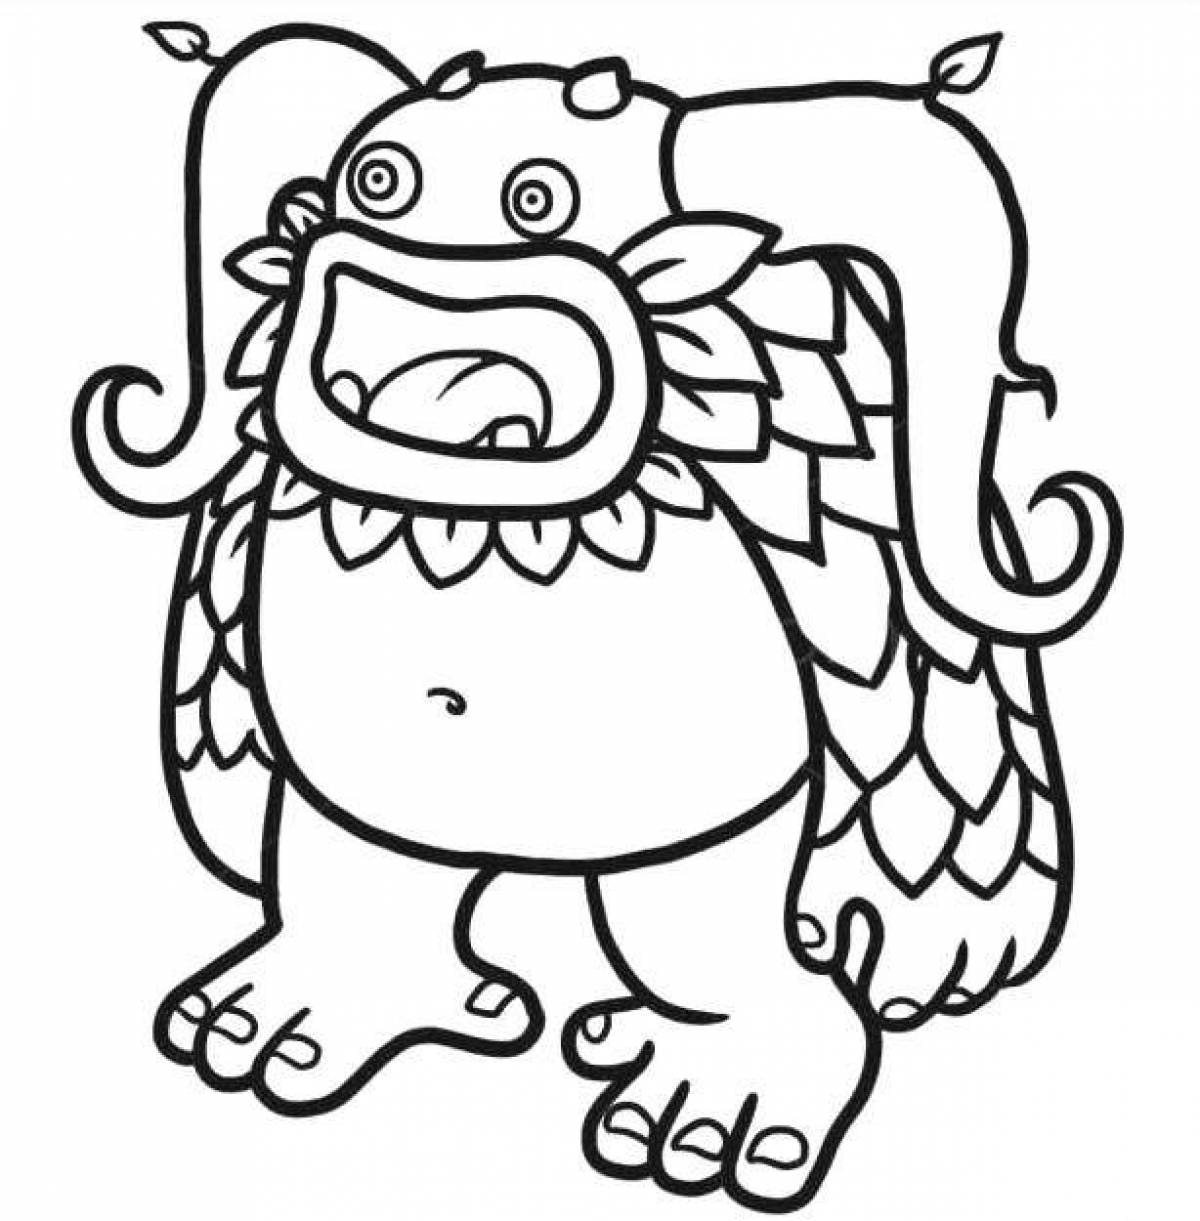 Adorable singing monsters coloring pages for kids